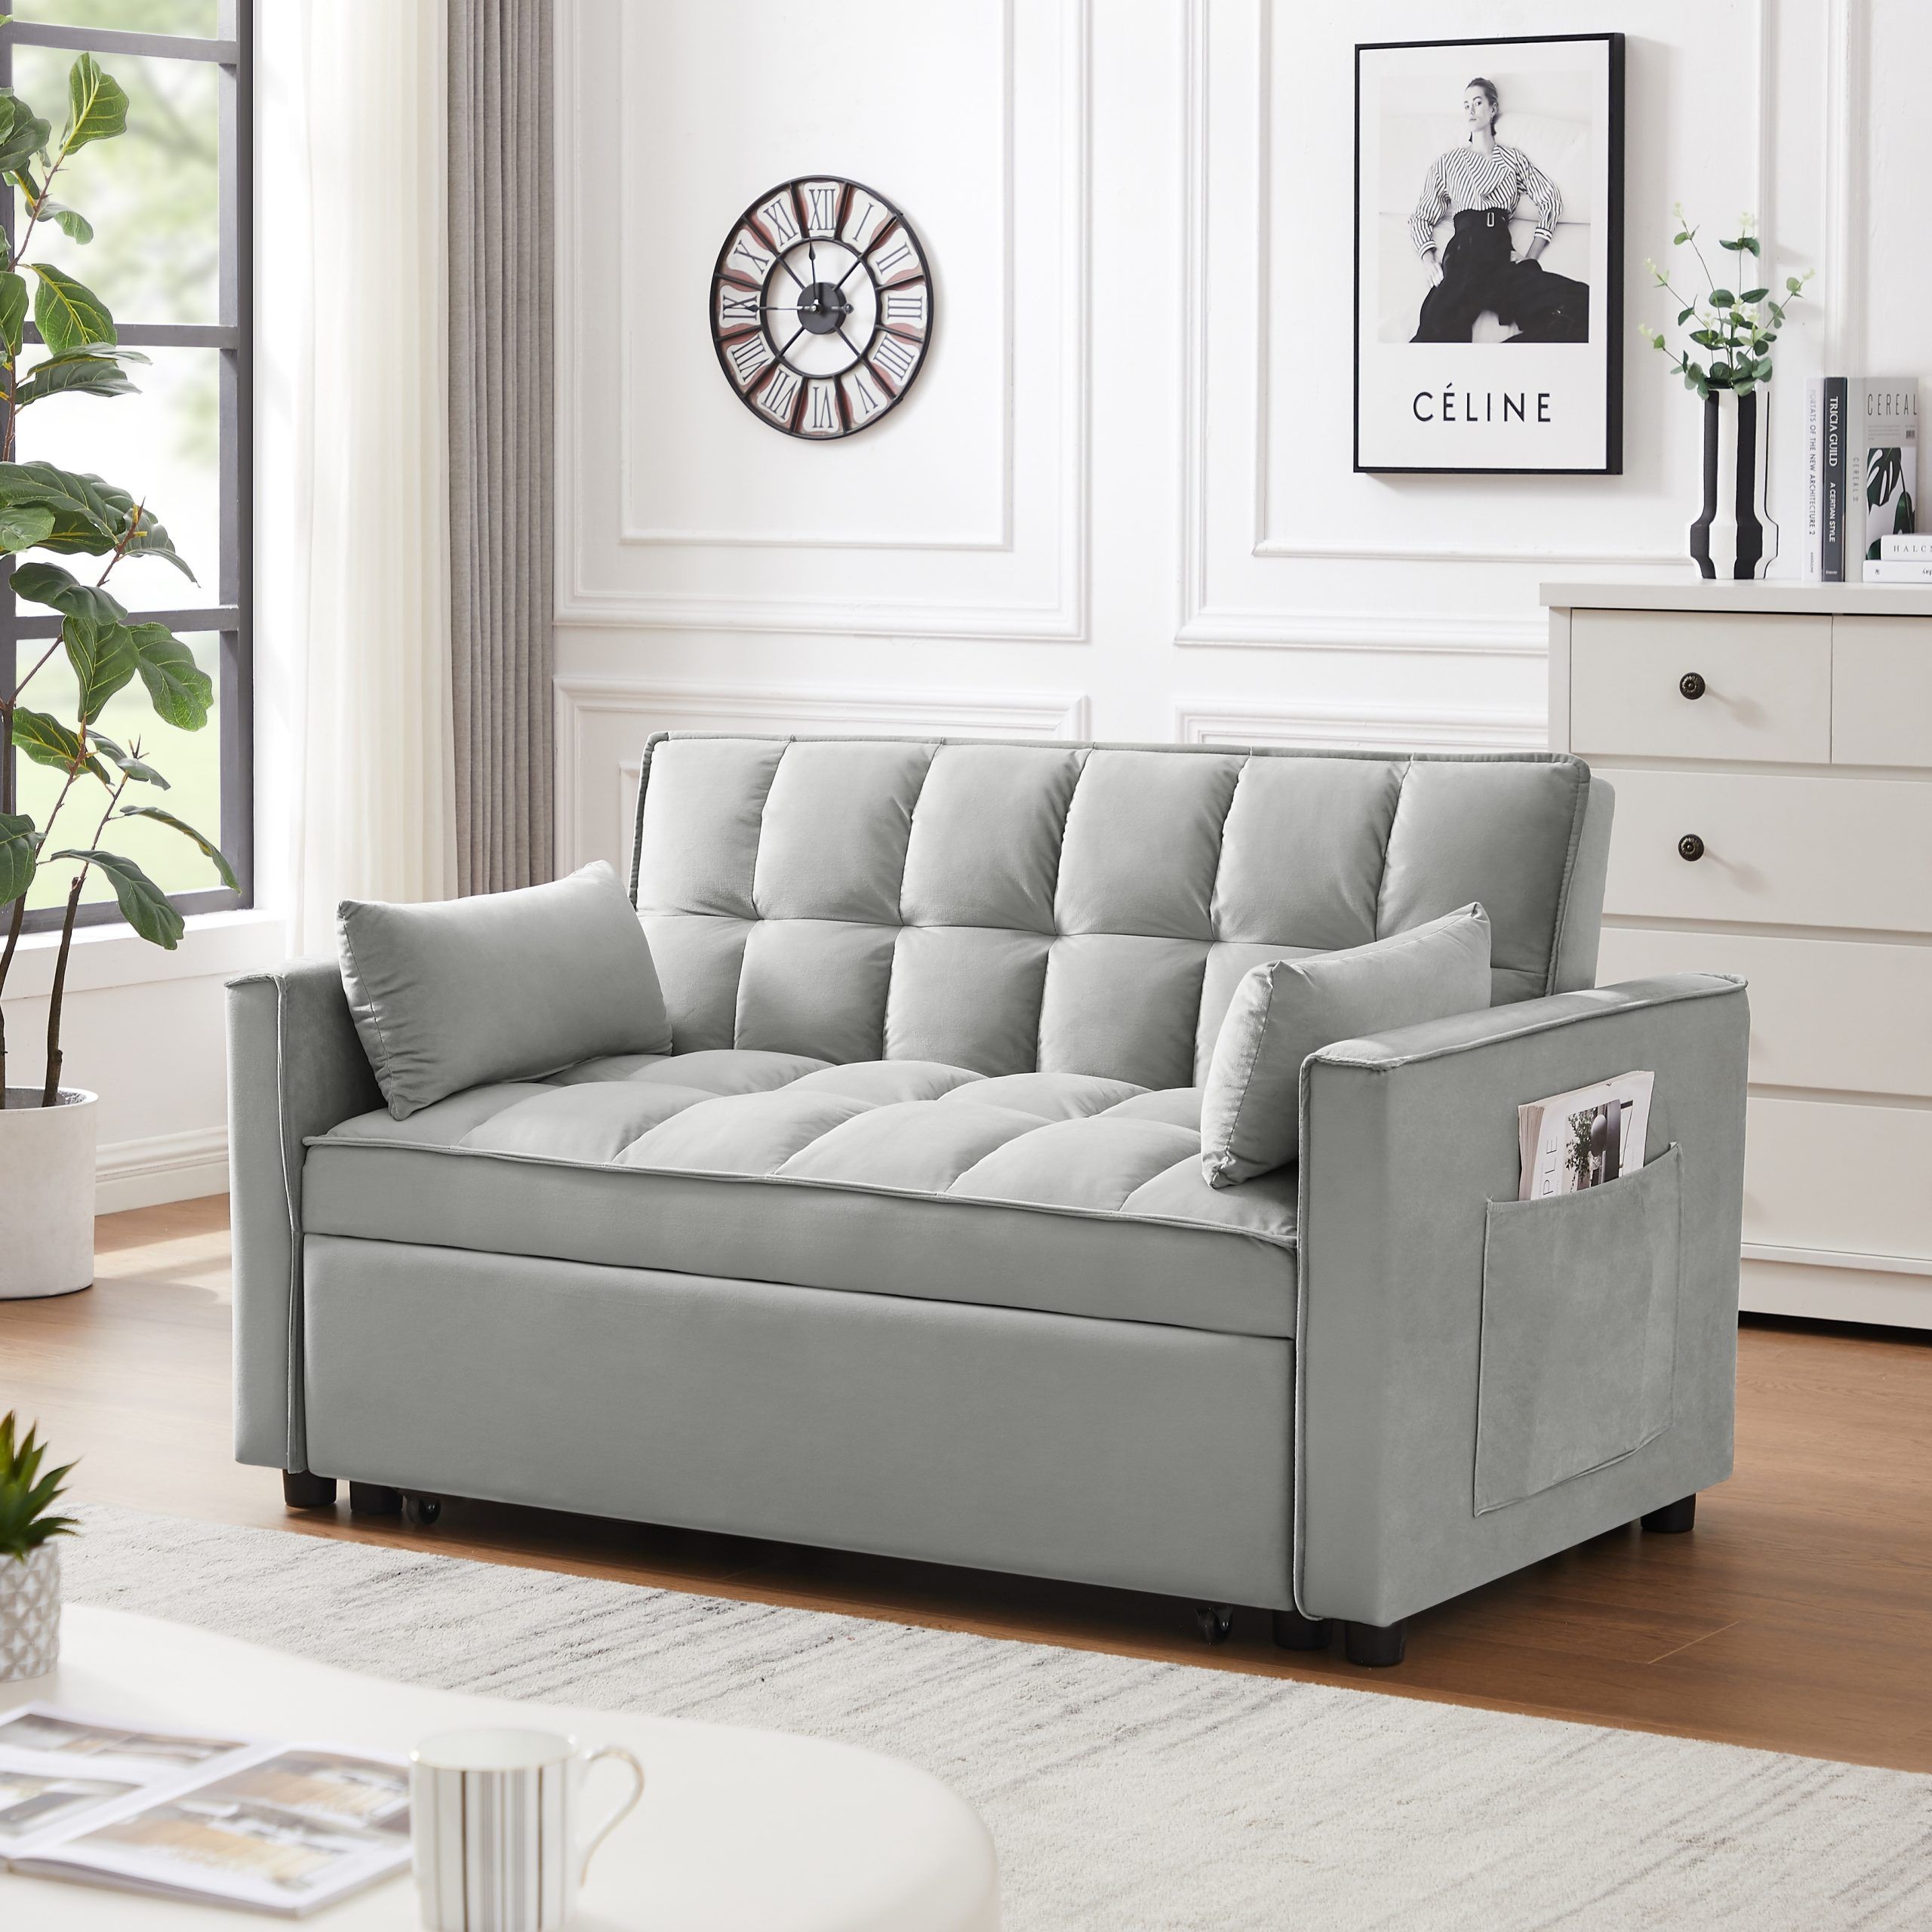 Velvet Loveseat Futon Sofa Pullout Bed, 3 In 1 Convertible Sleeper Sofa Bed  – Bed Bath & Beyond – 38908553 Intended For 3 In 1 Gray Pull Out Sleeper Sofas (Photo 6 of 15)